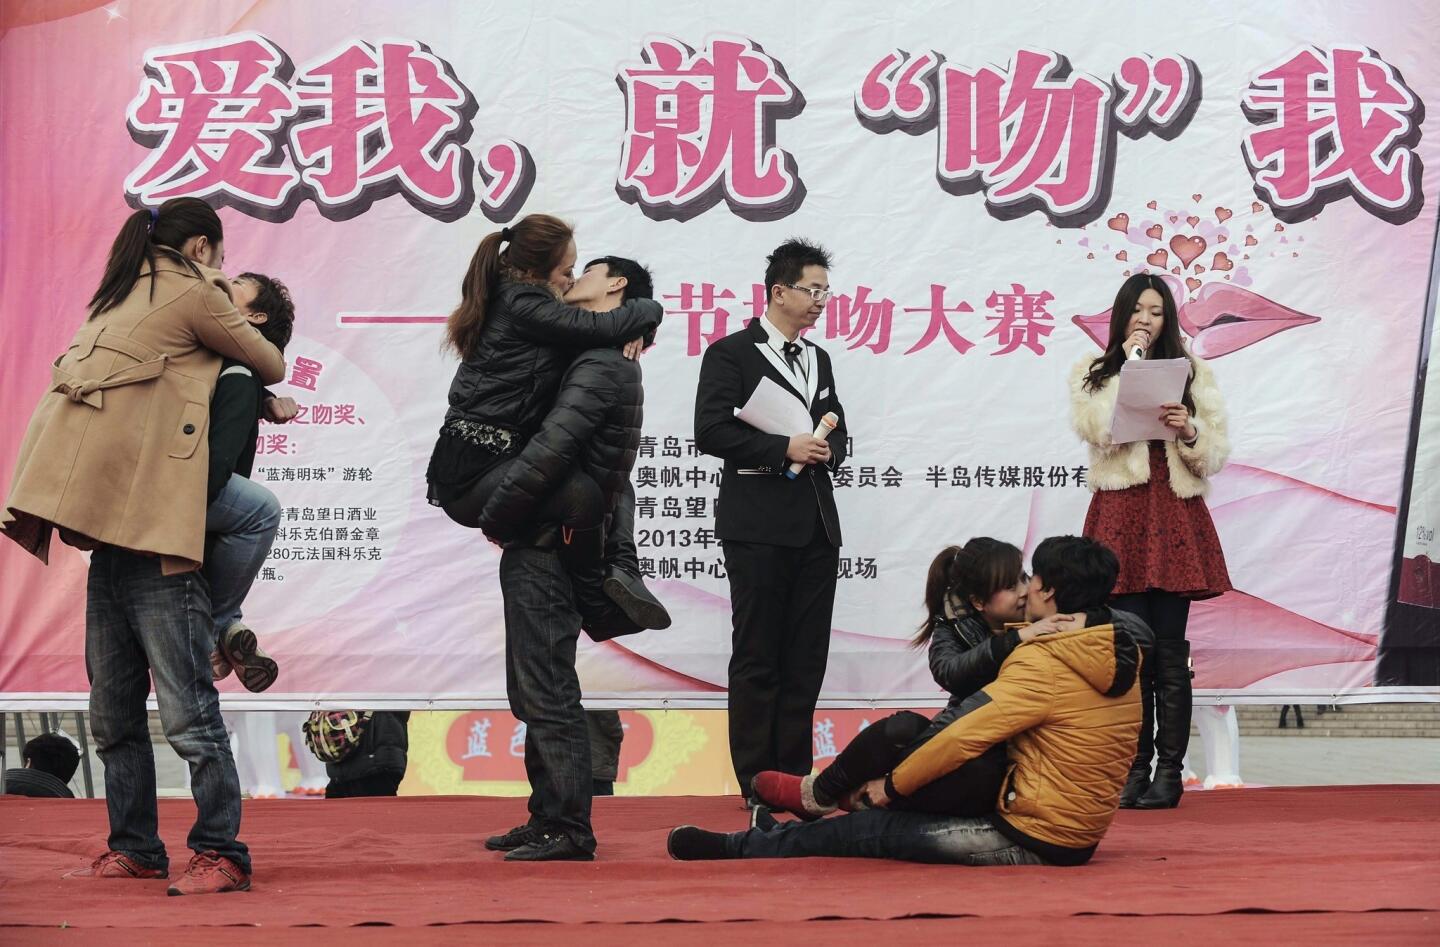 Kissing contest on Valentine's Day